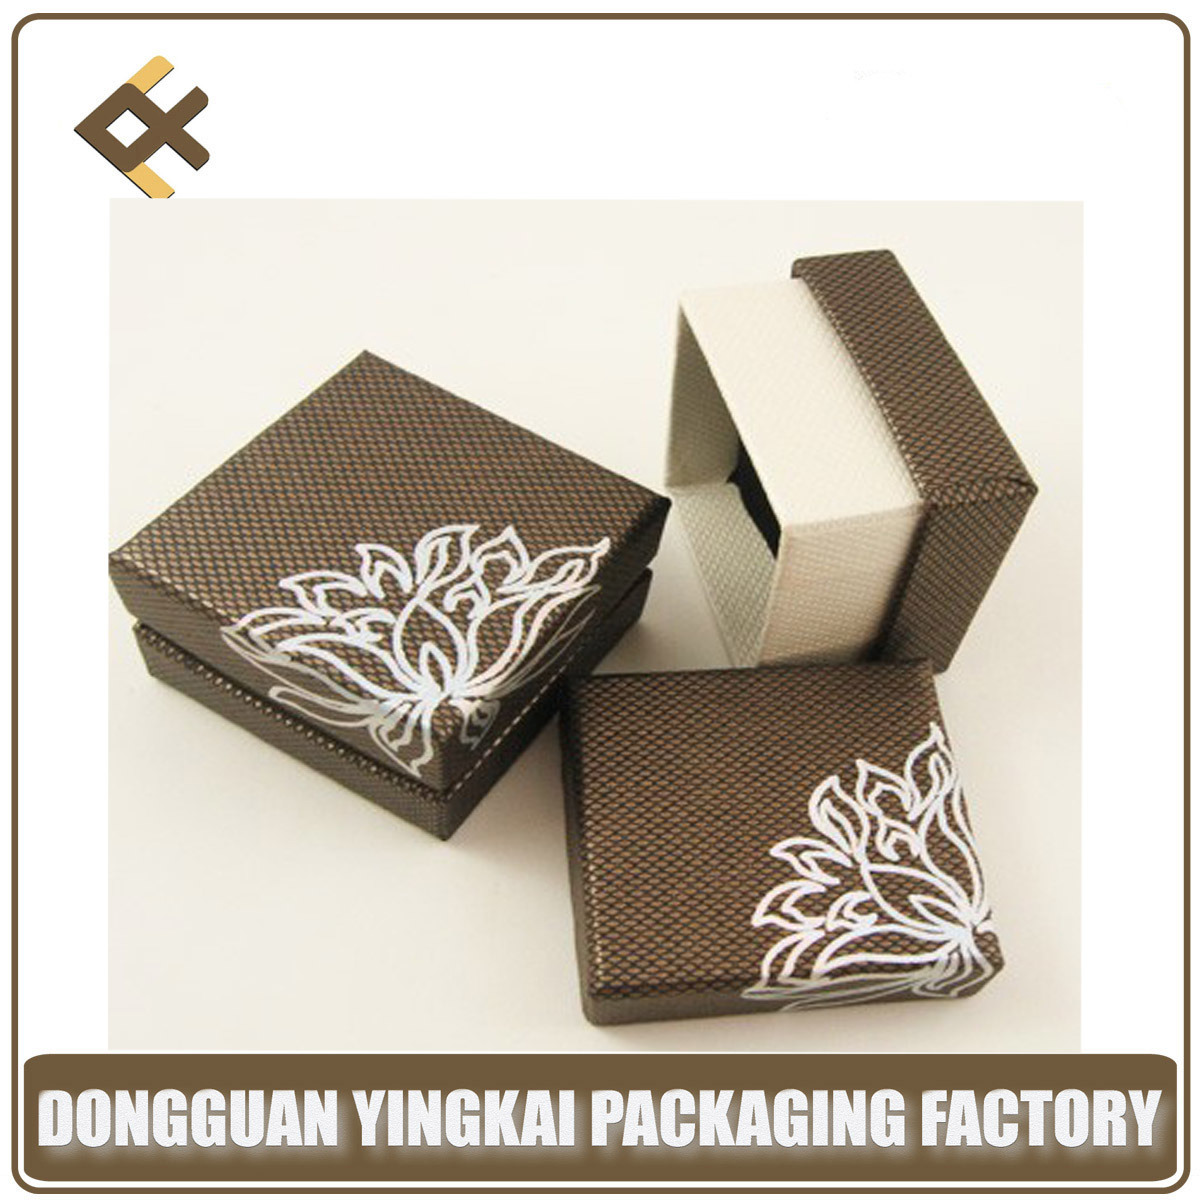 Special Jewellery Gift Paper Ring Box with Costomed Logo